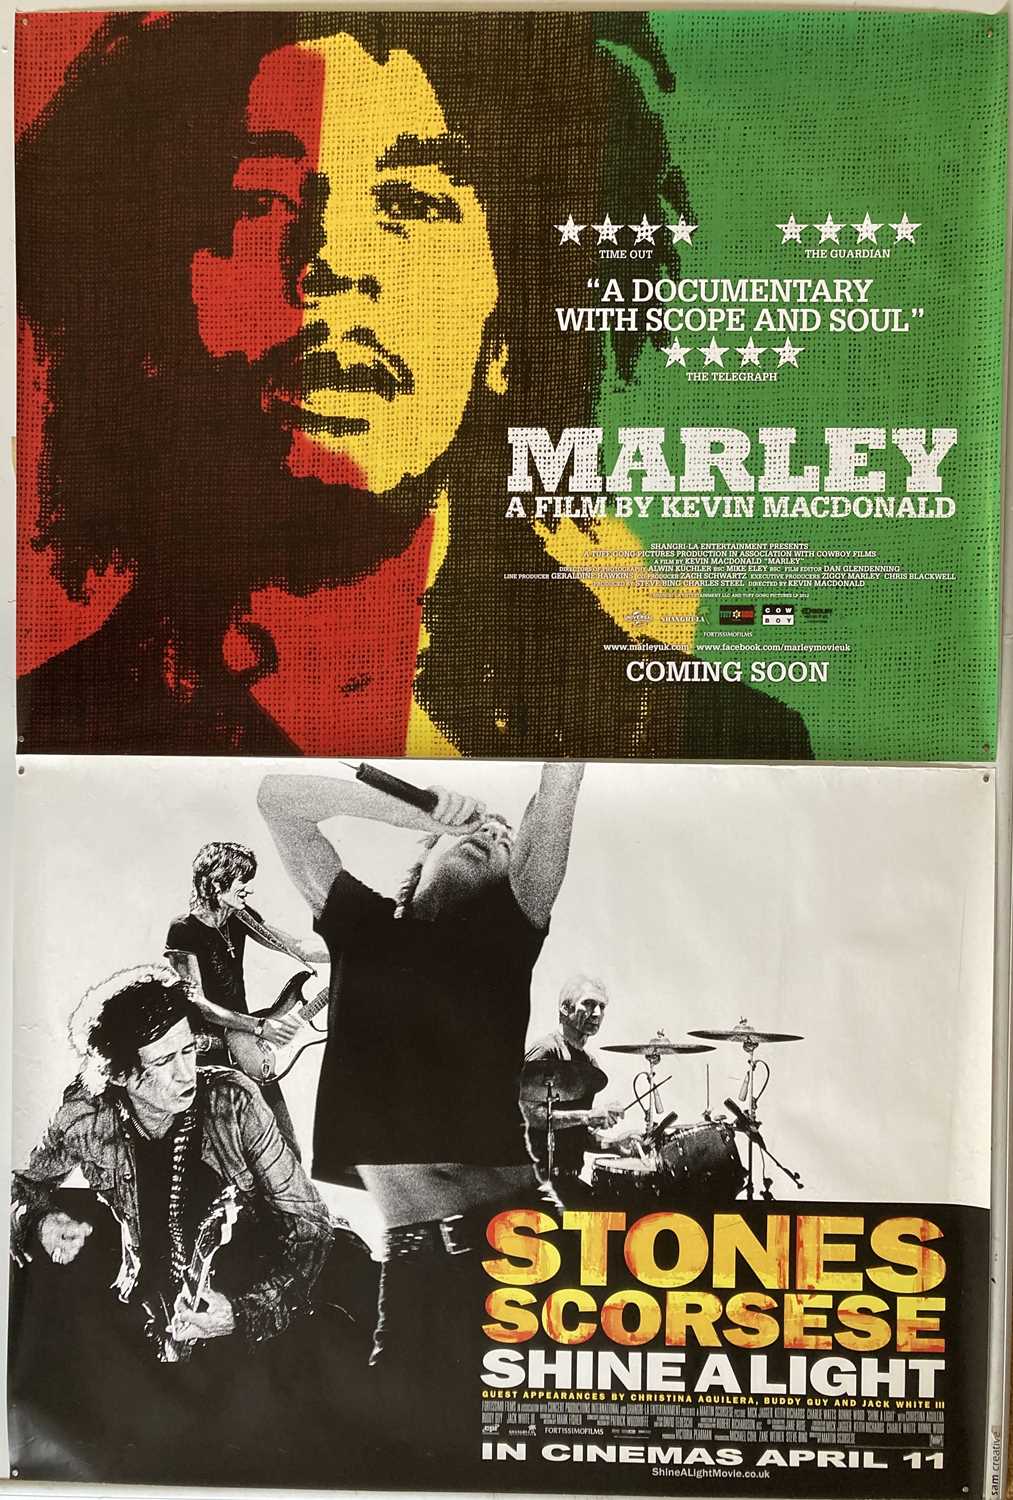 Lot 31 - BOB MARLEY / ROLLING STONES DOCUMENTARY POSTERS.